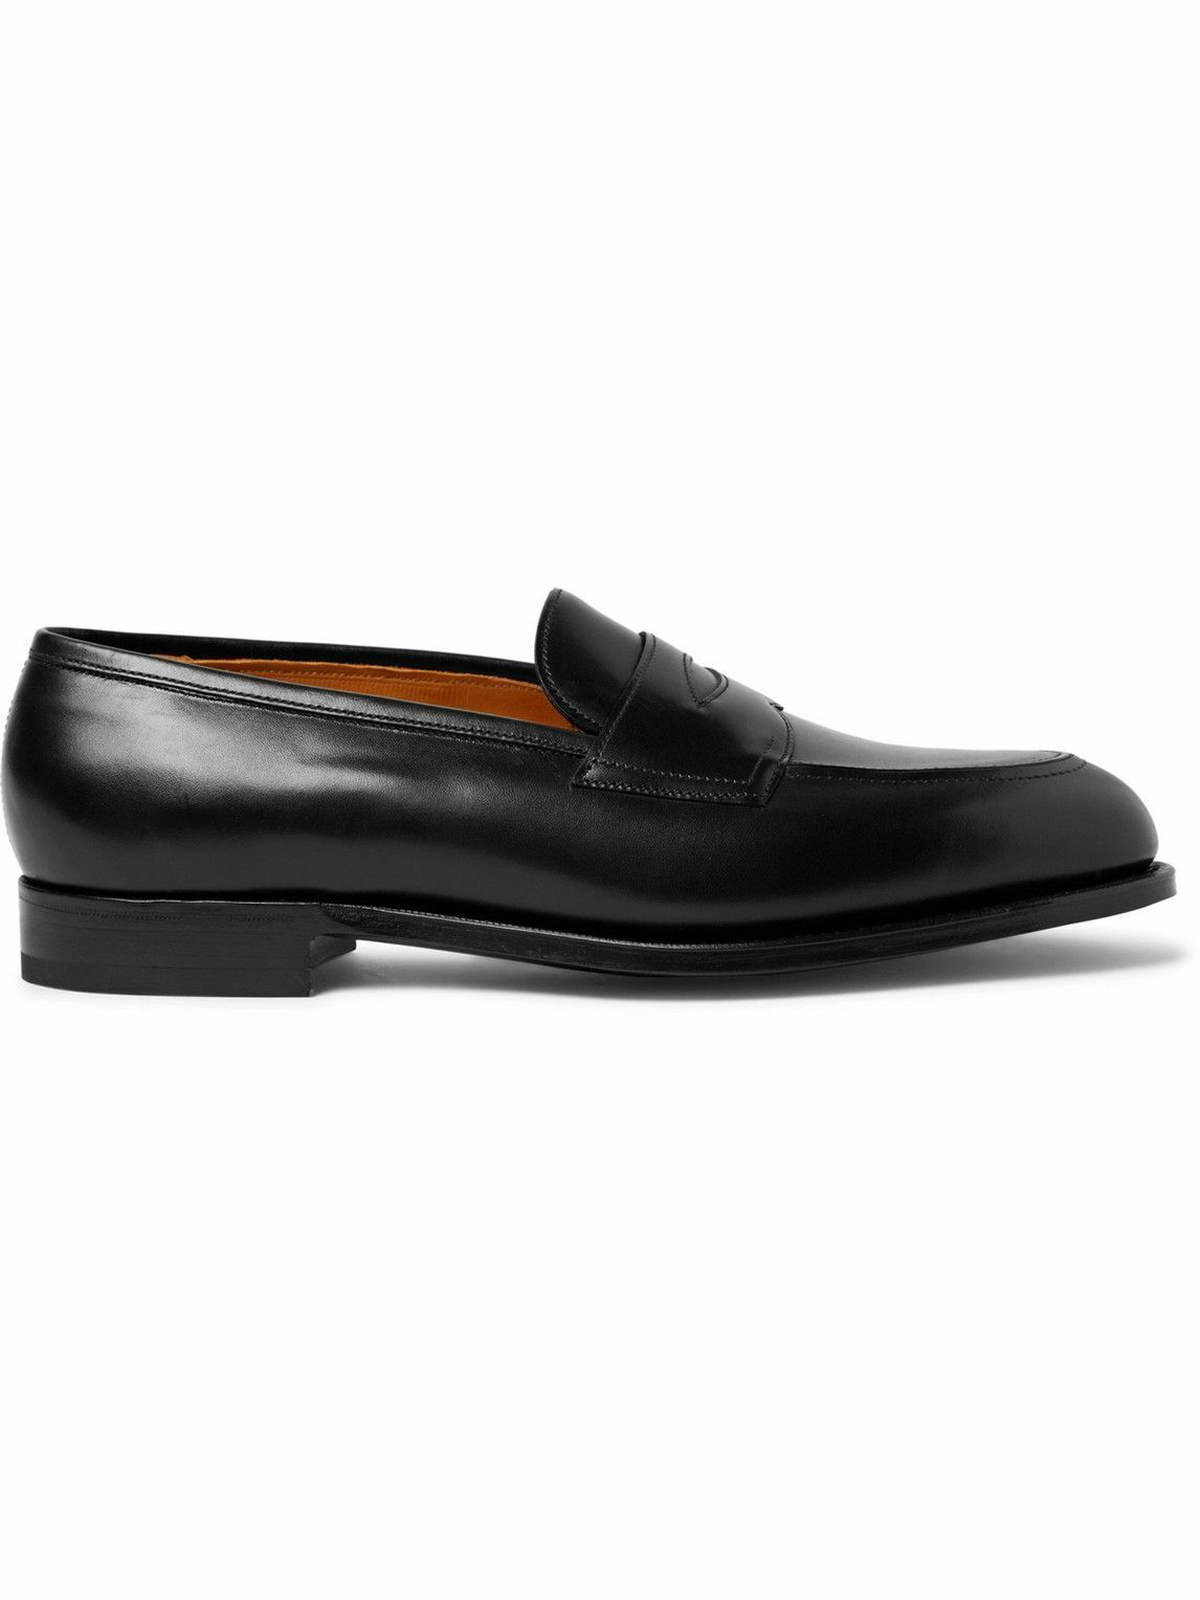 Edward Green - Piccadilly Leather Penny Loafers - Black Edward Green